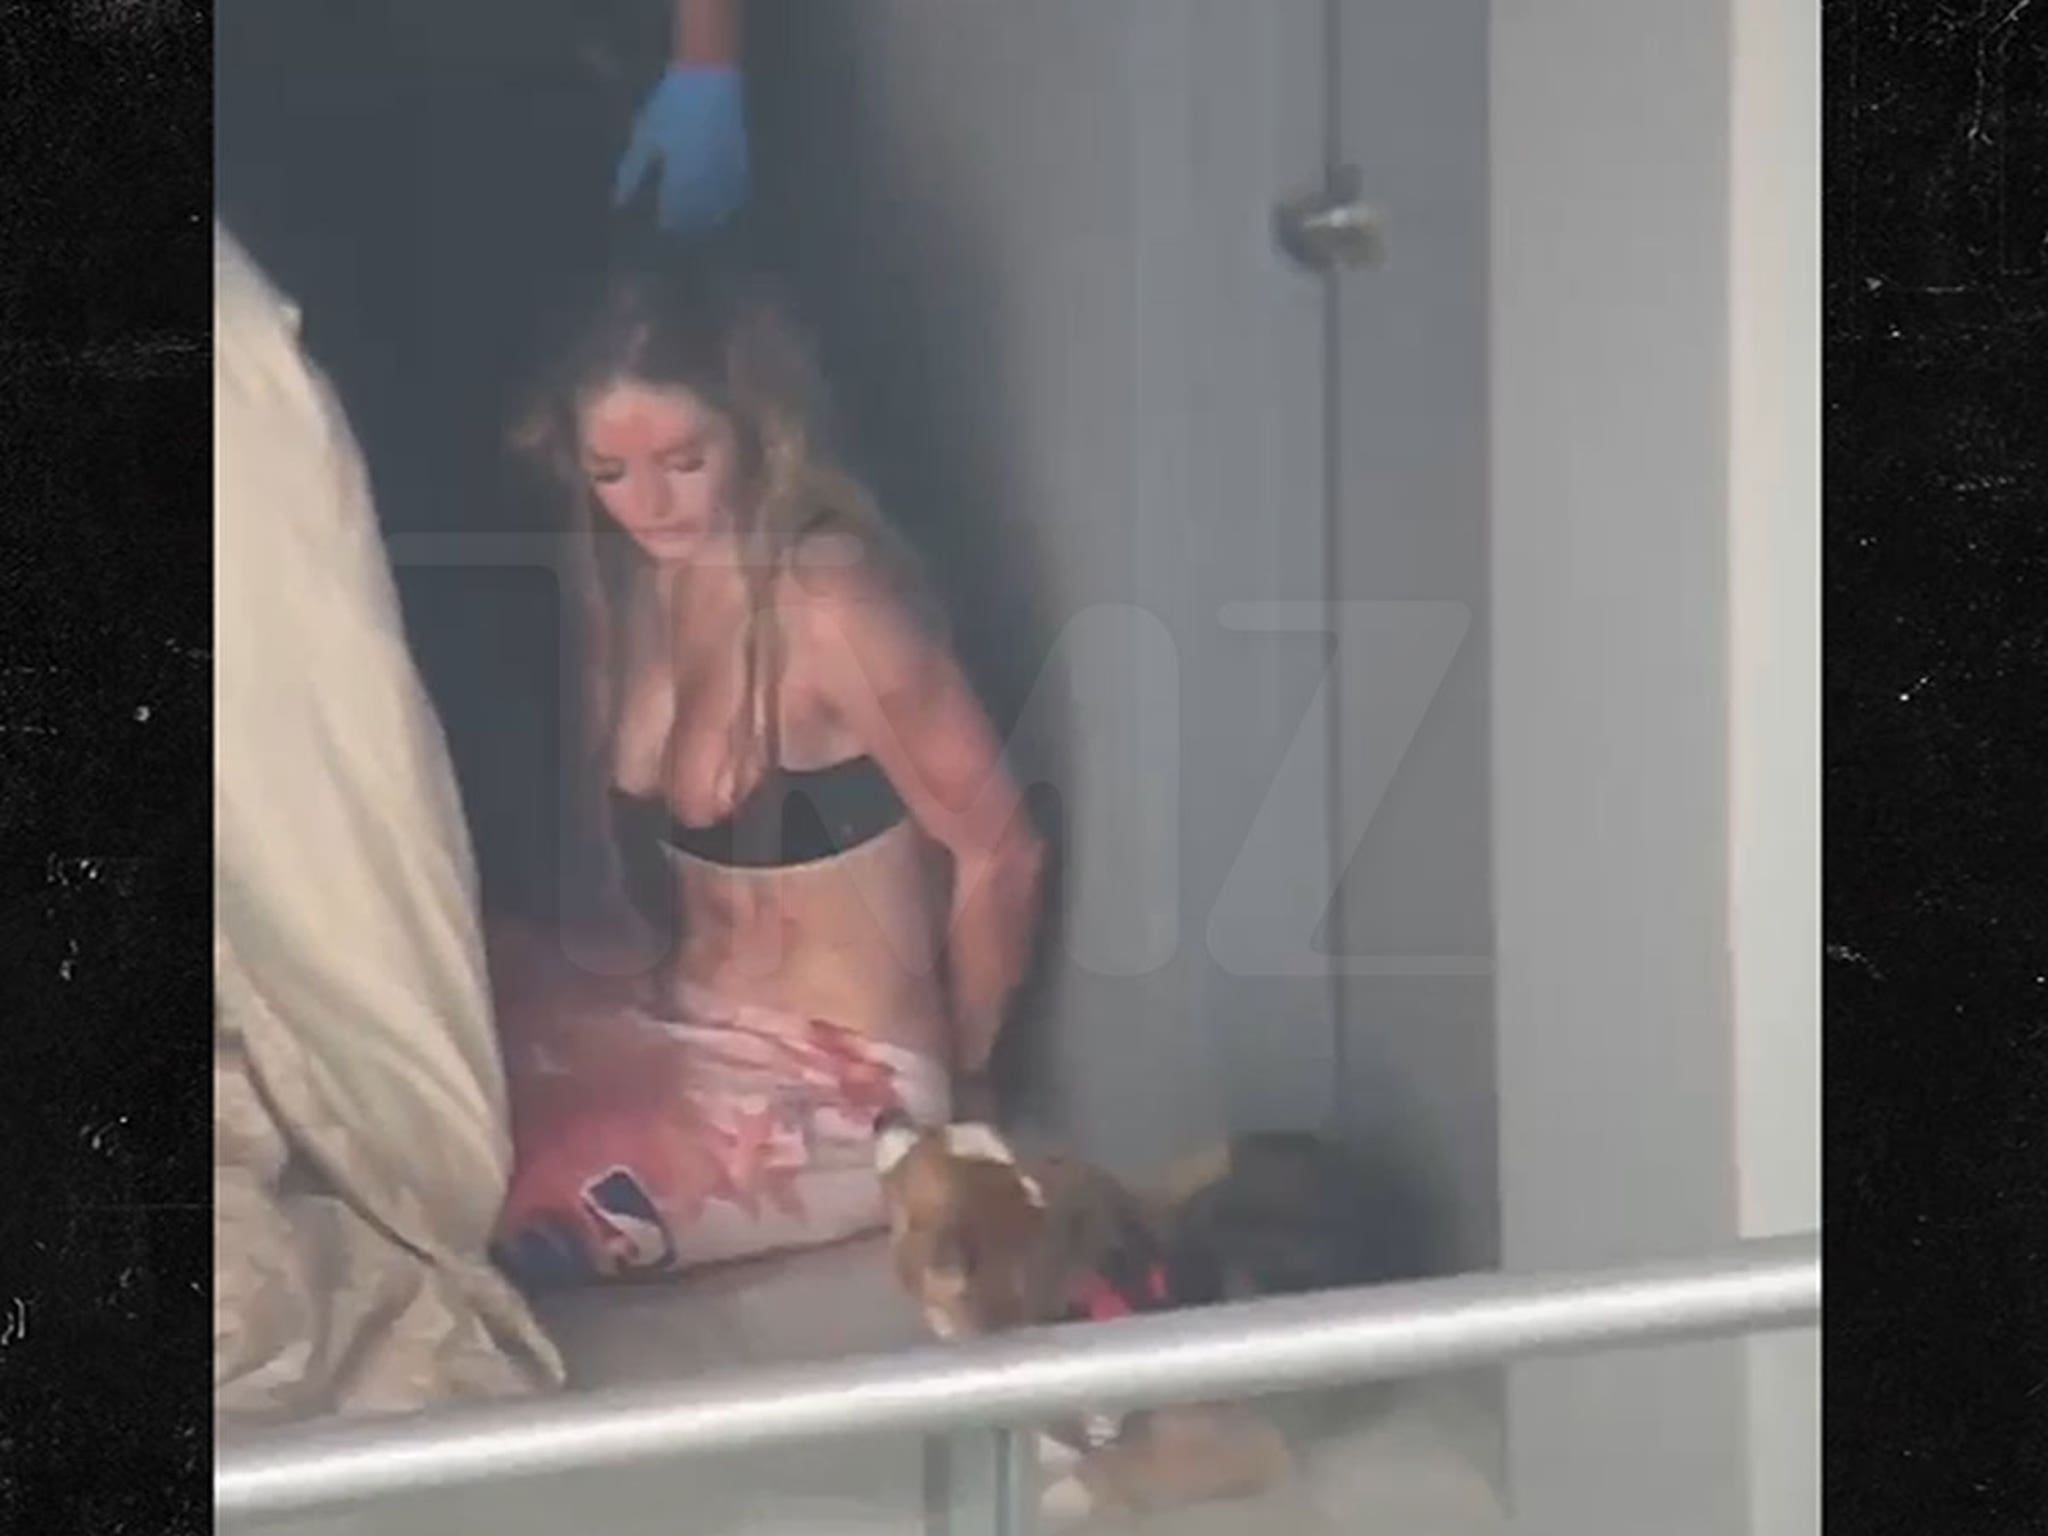 Video From Fatal Miami Stabbing Shows IG Model Covered In Blood image image